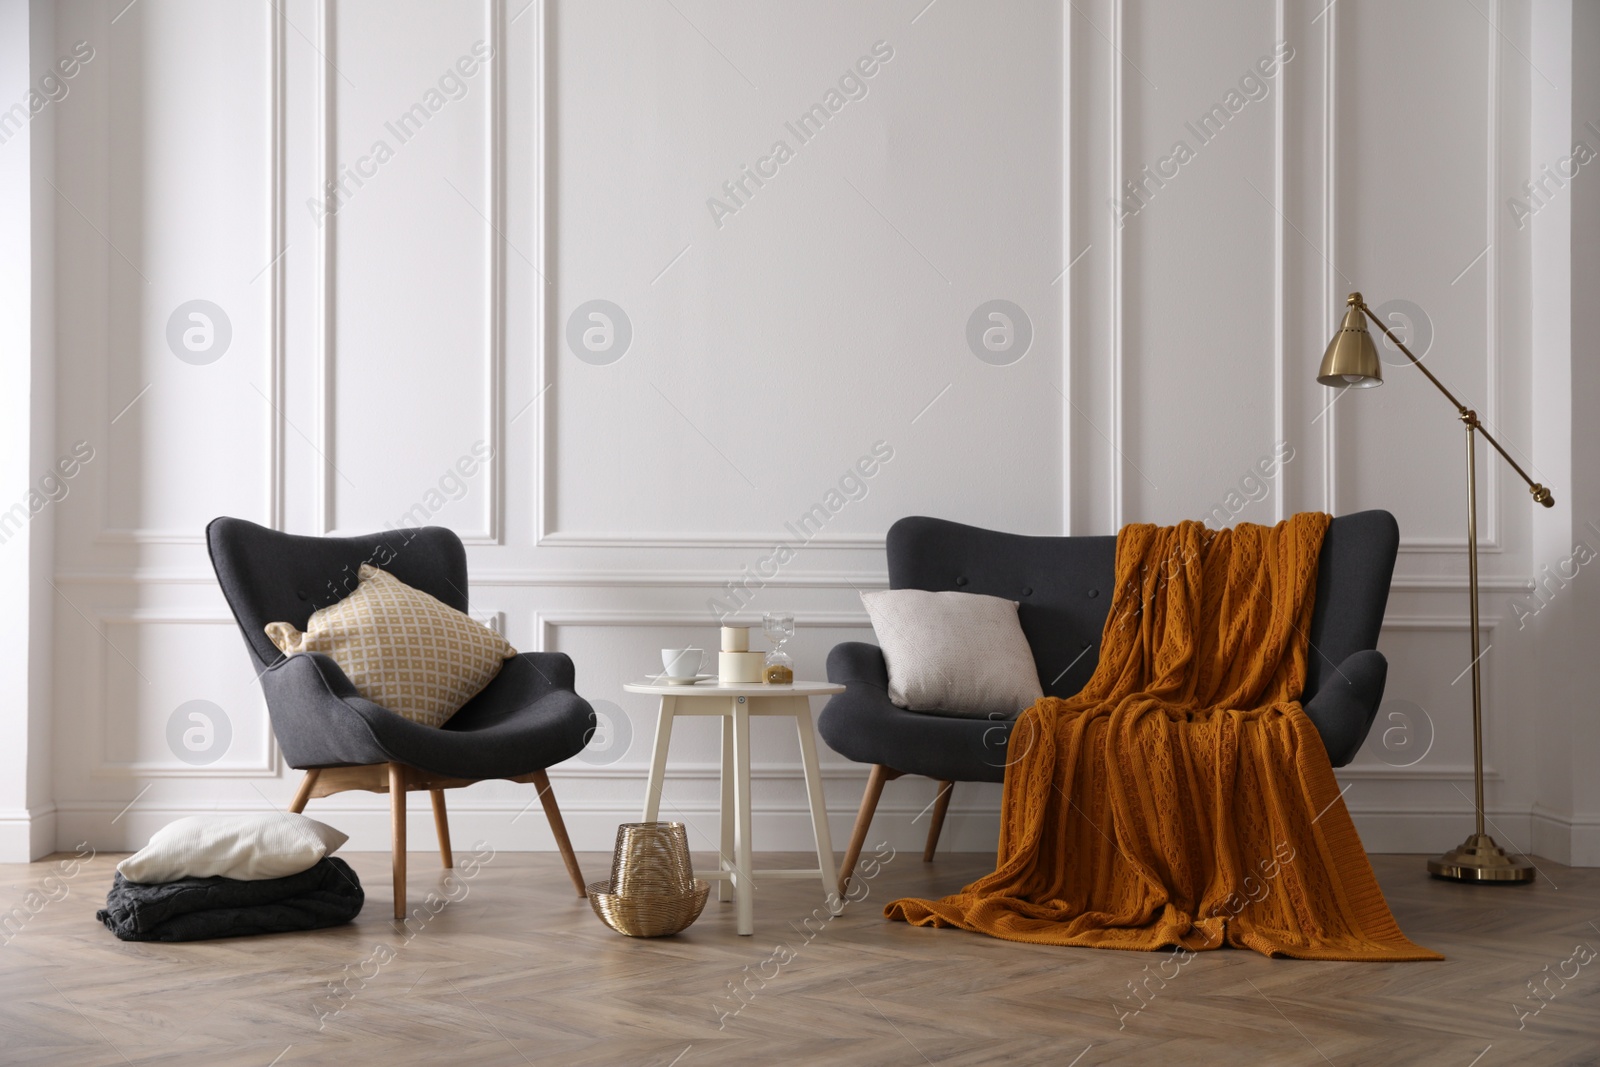 Photo of Comfortable sofa with knitted blanket, armchair and lamp in stylish room interior